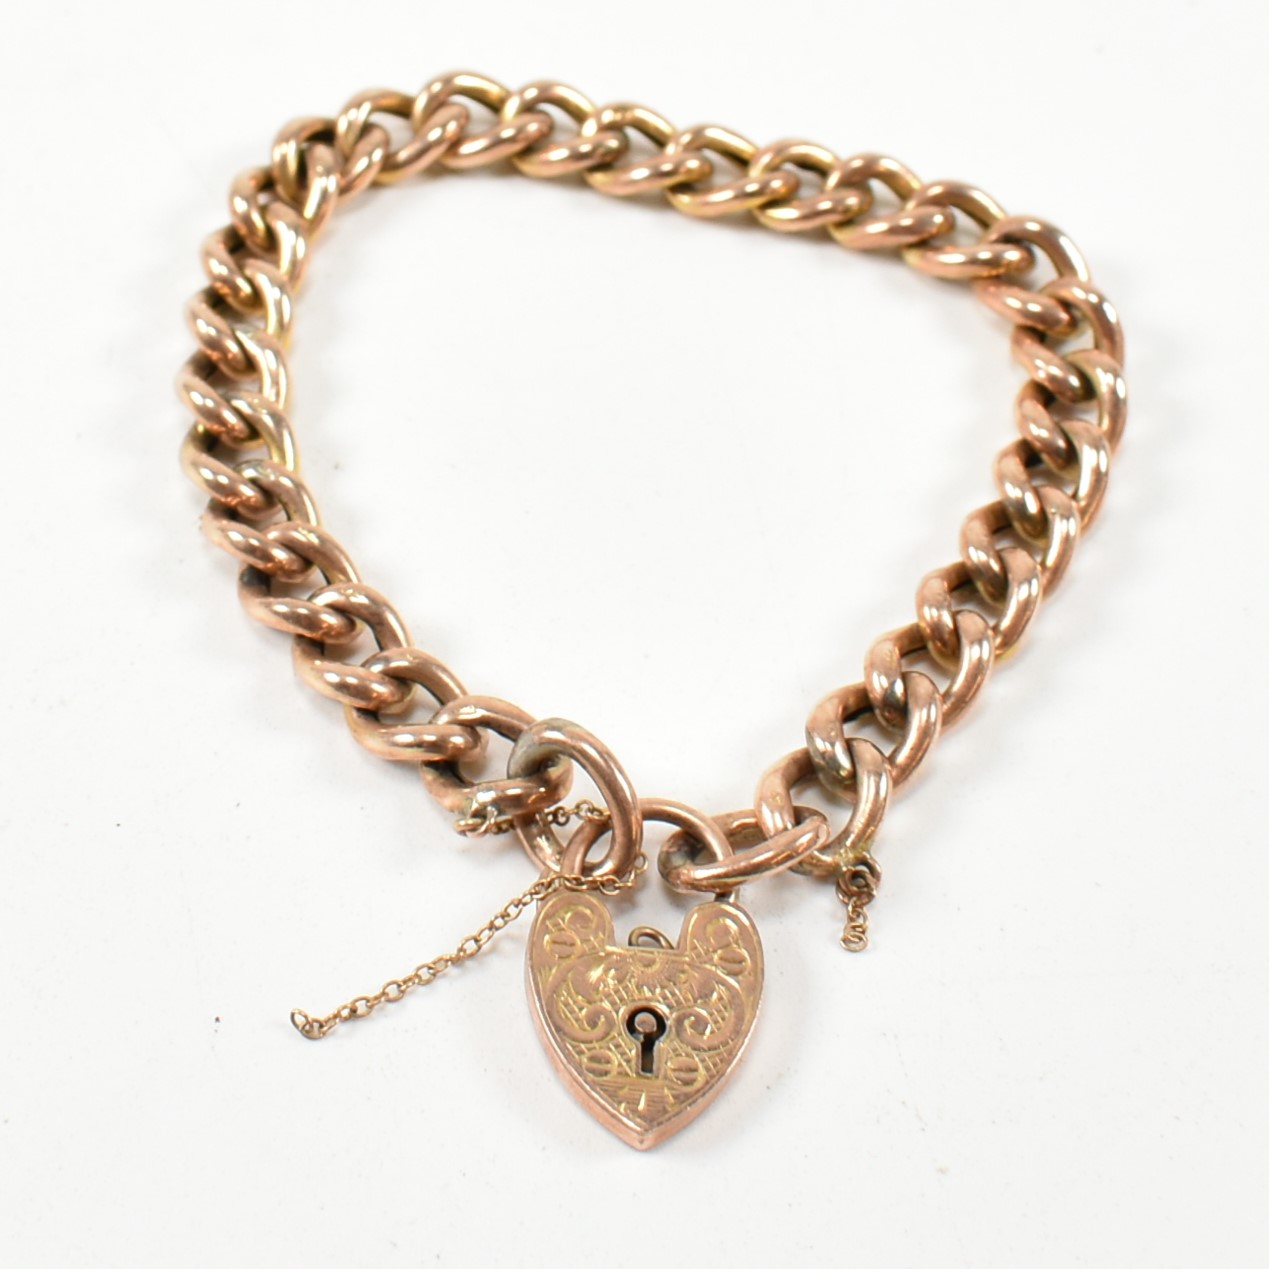 19TH CENTURY ROSE METAL CURB LINK BRACELET WITH 9CT GOLD HEART PADLOCK CLASP